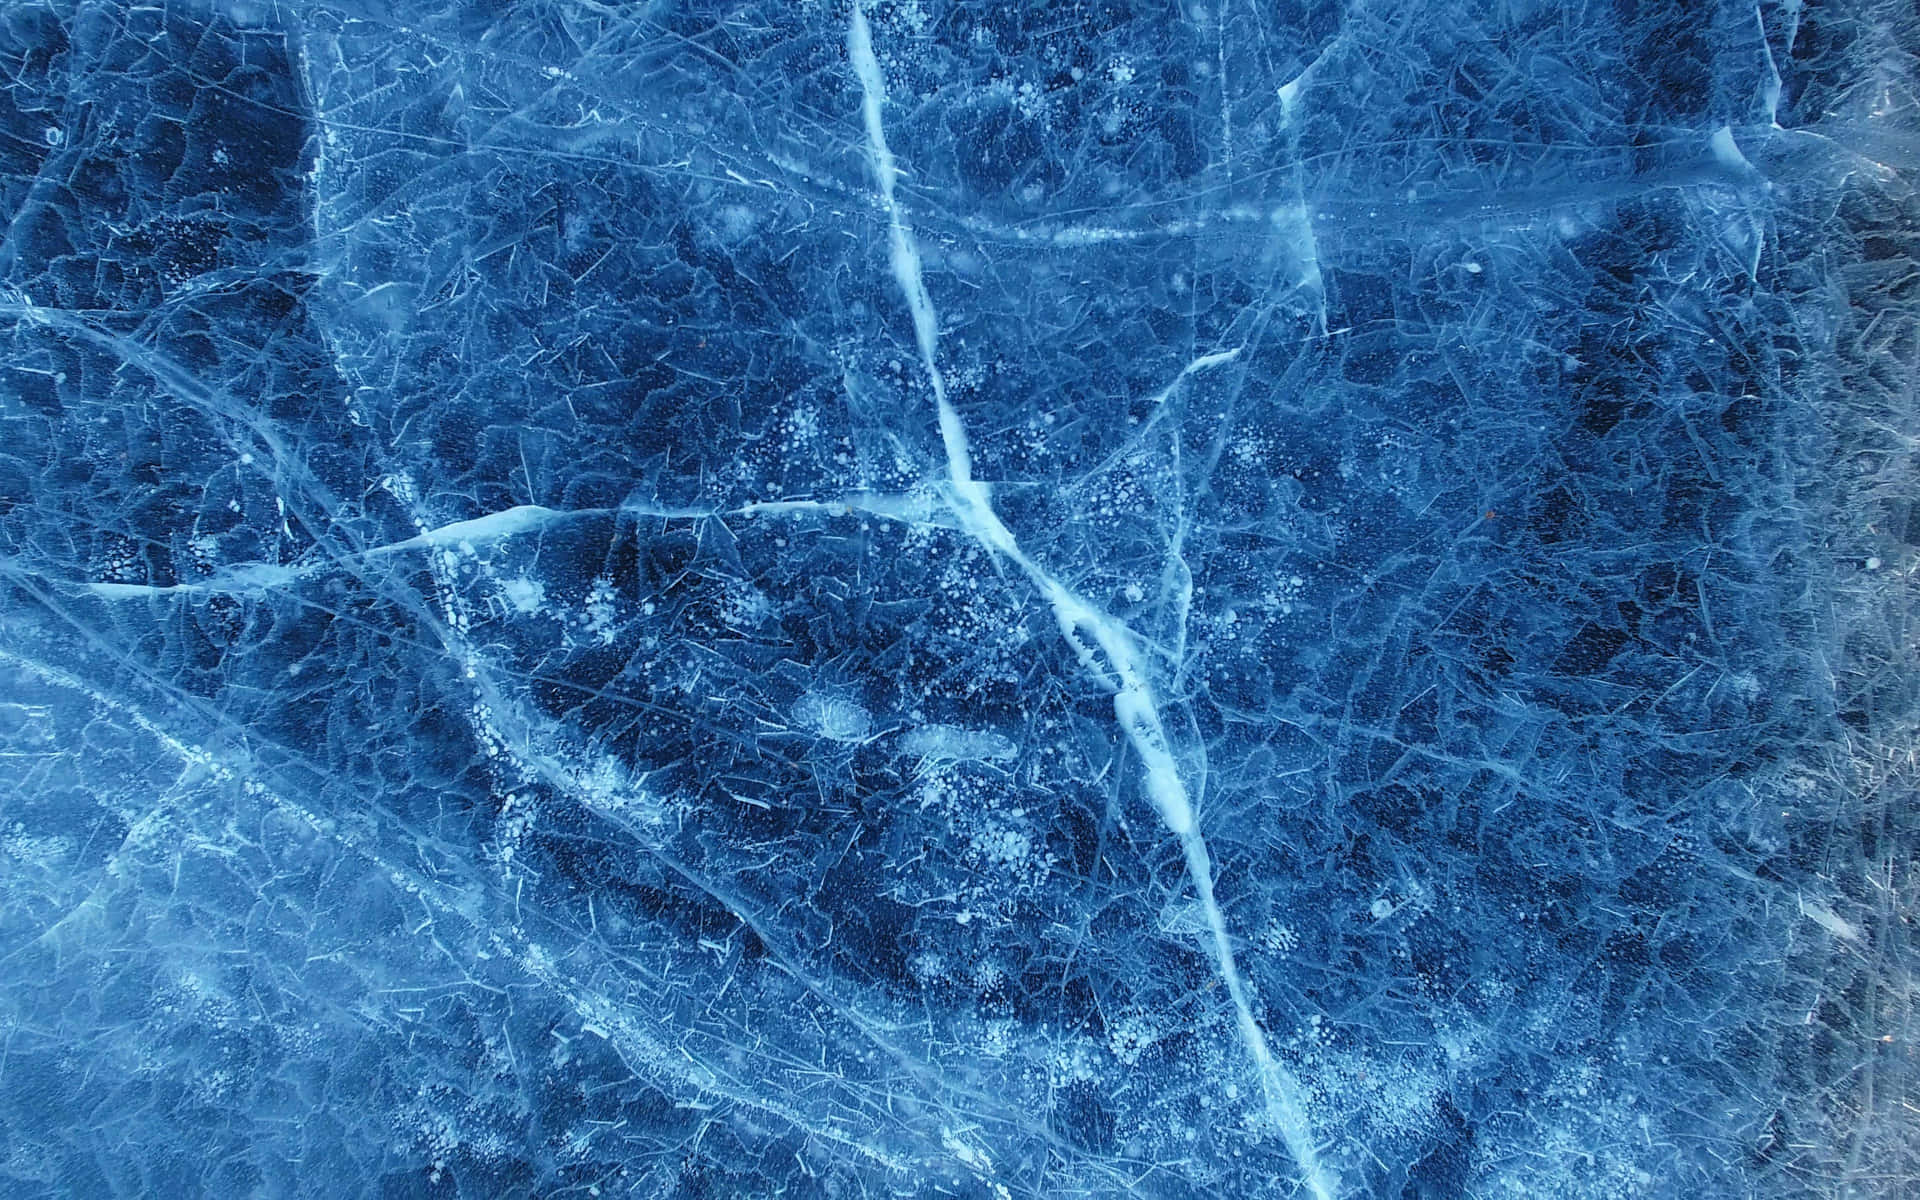 The deep blue shades of ice take on an unforgettable majestic beauty Wallpaper